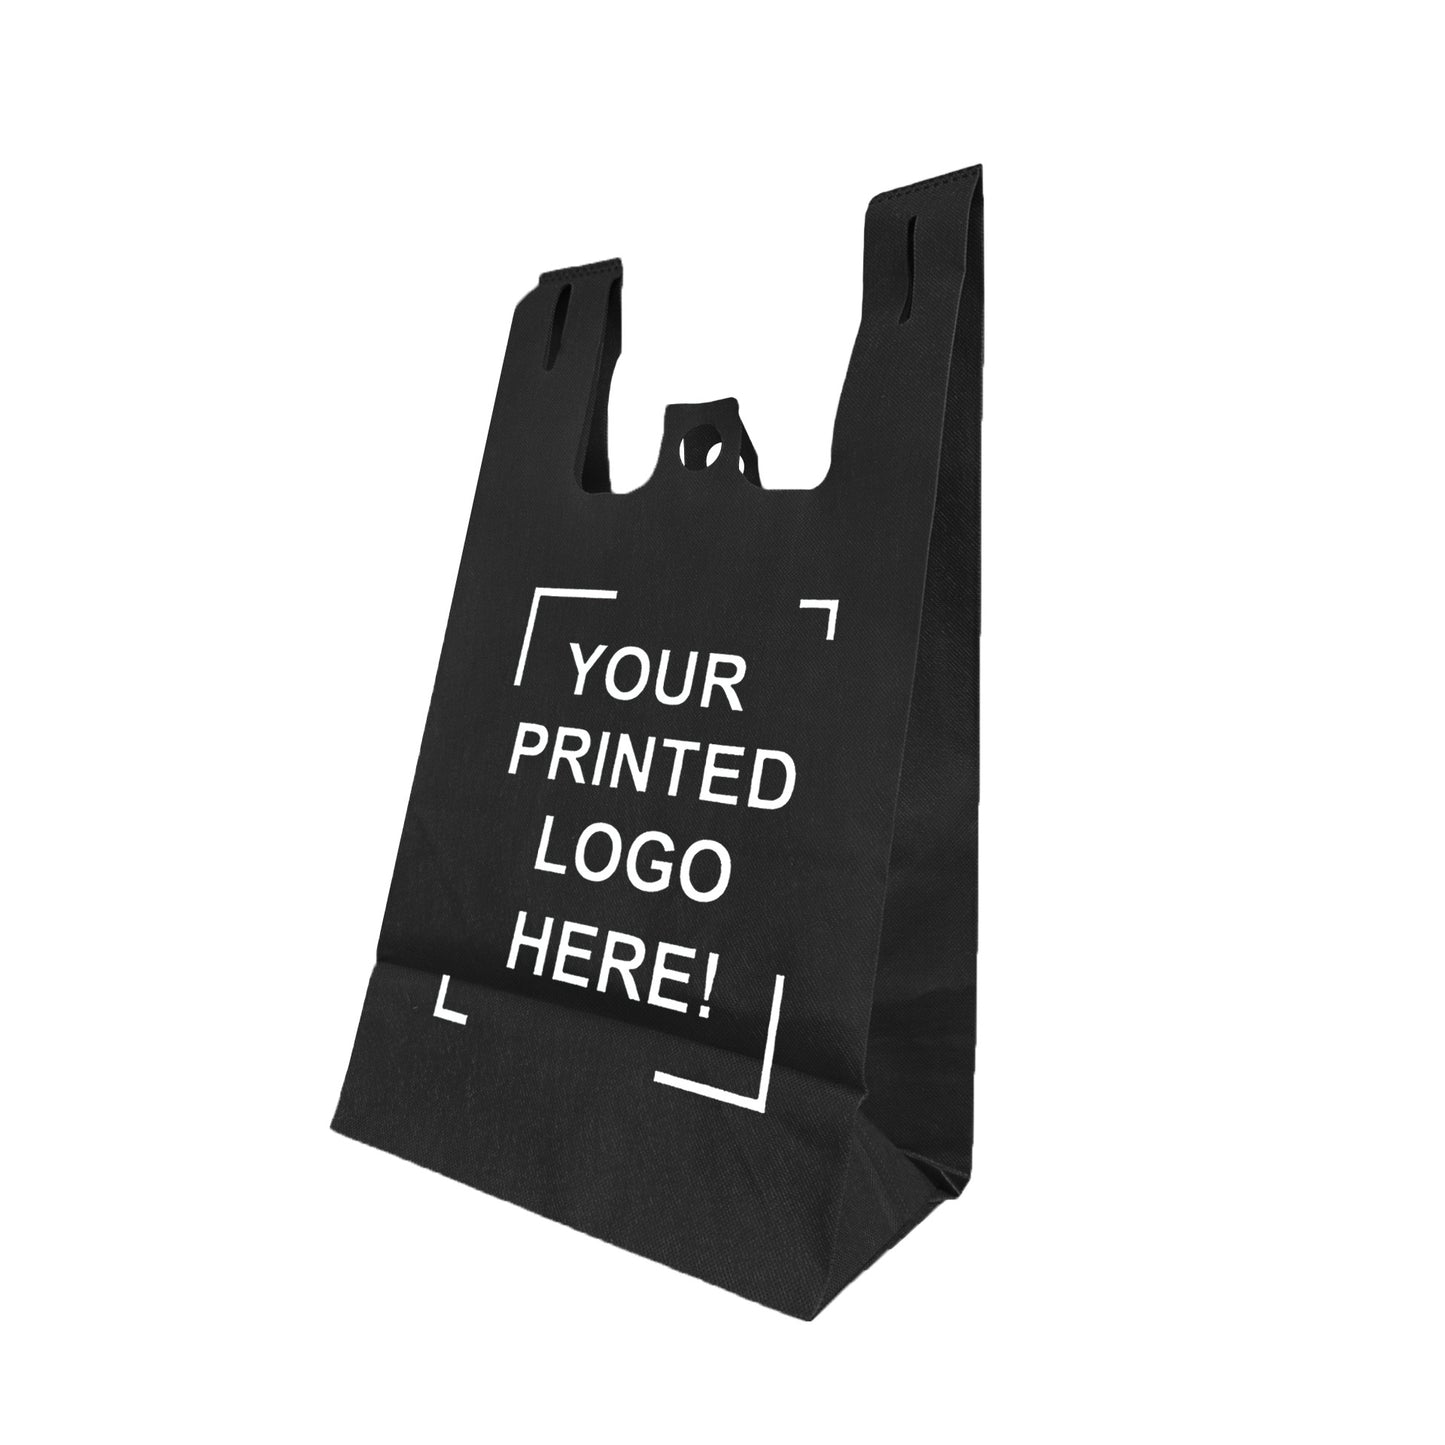 200pcs, Non-Woven Reusable T-Shirt Bag 11x7x20x7 inches Black Shopping Bags Square Bottom, One Color Custom Print, Printed in Canada